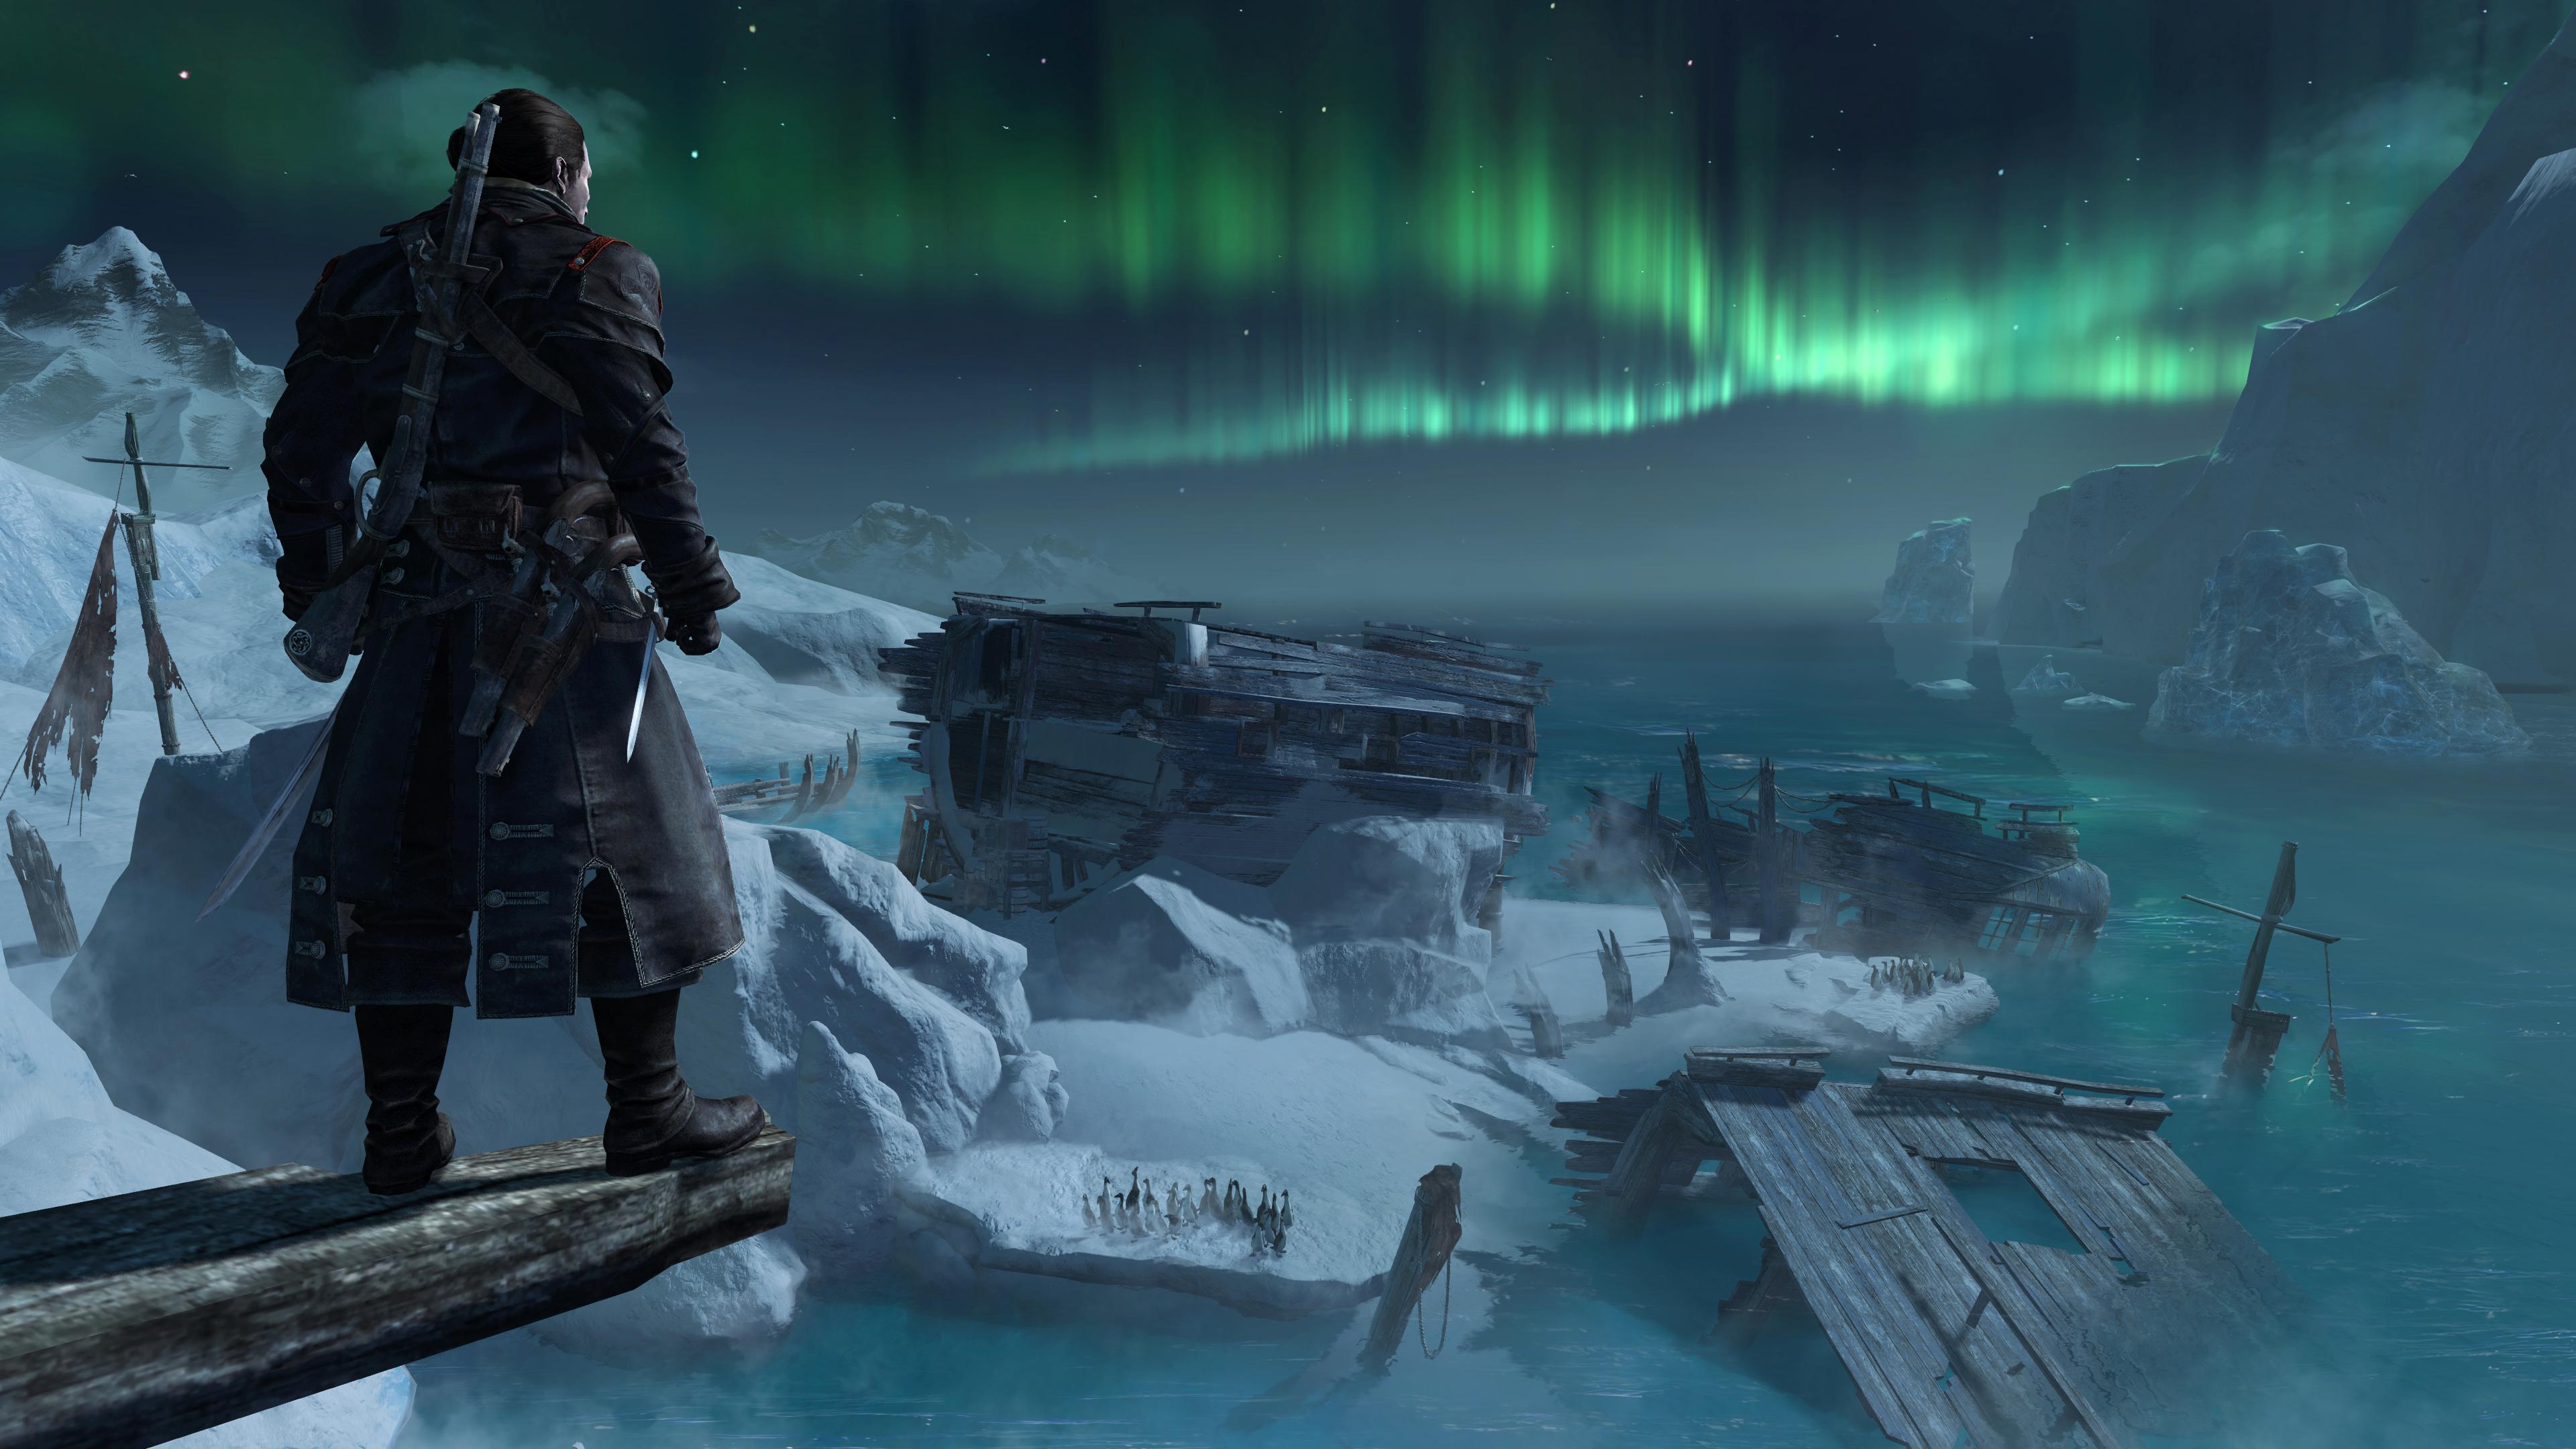 Amazing Assassin's Creed: Rogue Pictures & Backgrounds